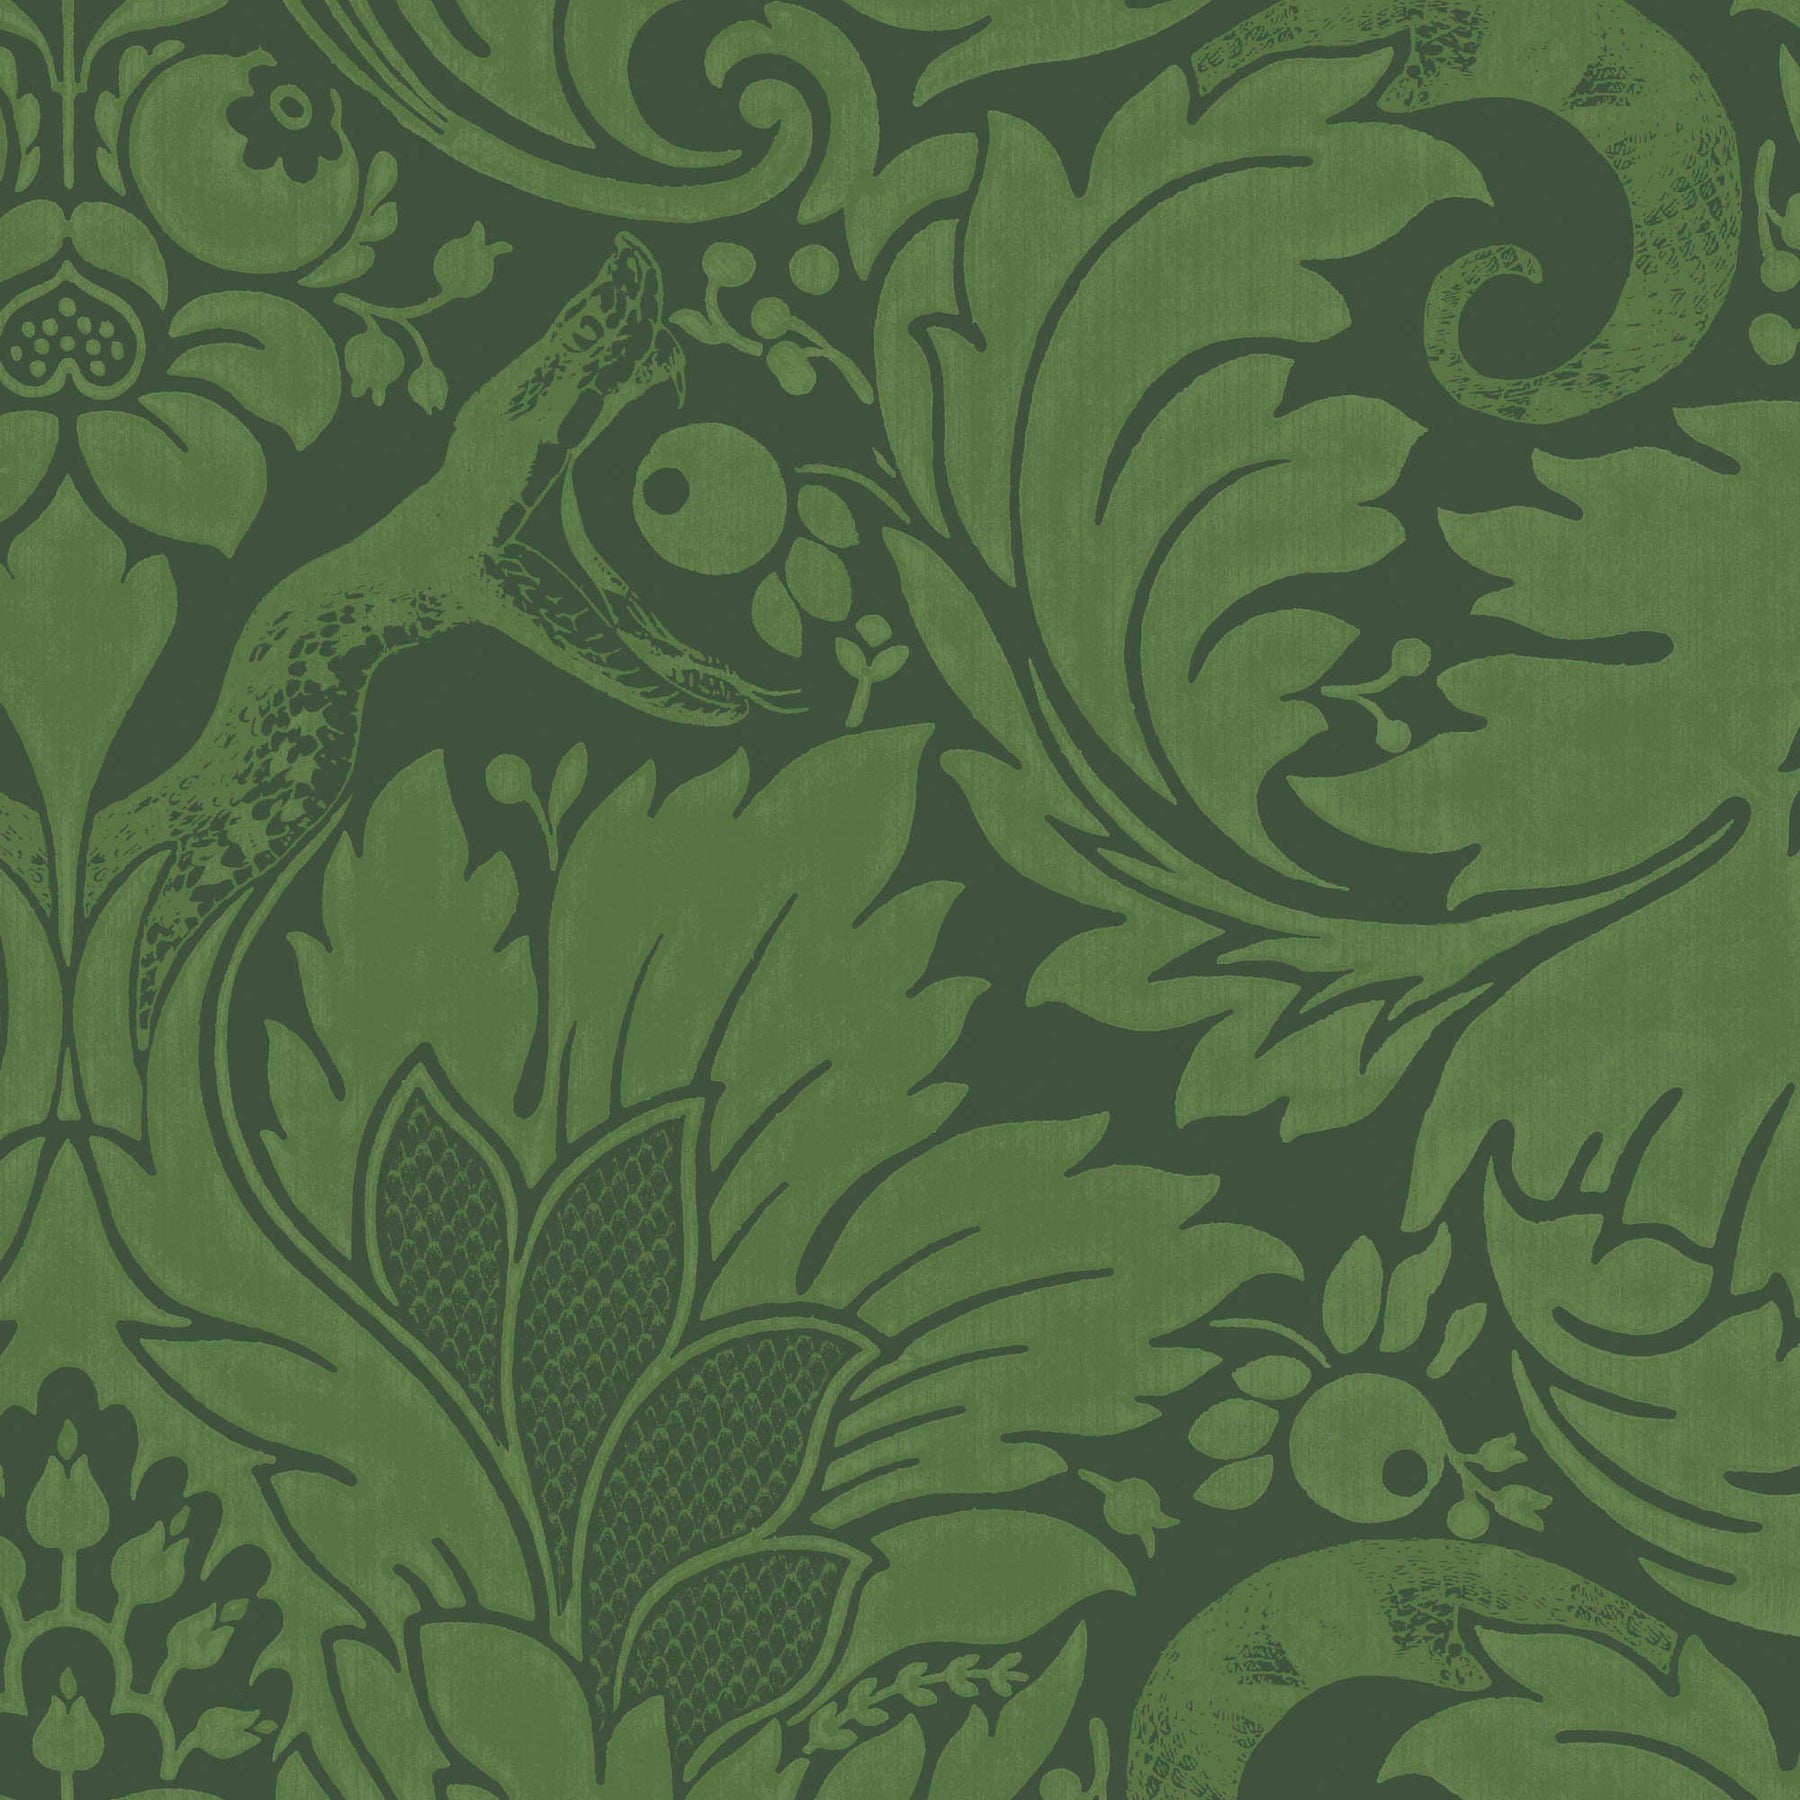 Buy Asian Paints Green Victorian Baroque Peel And Stick Self Adhesive  Wallpaper Ezycr8  3 x 045 x 3 Meters Online at Best Prices in India   JioMart